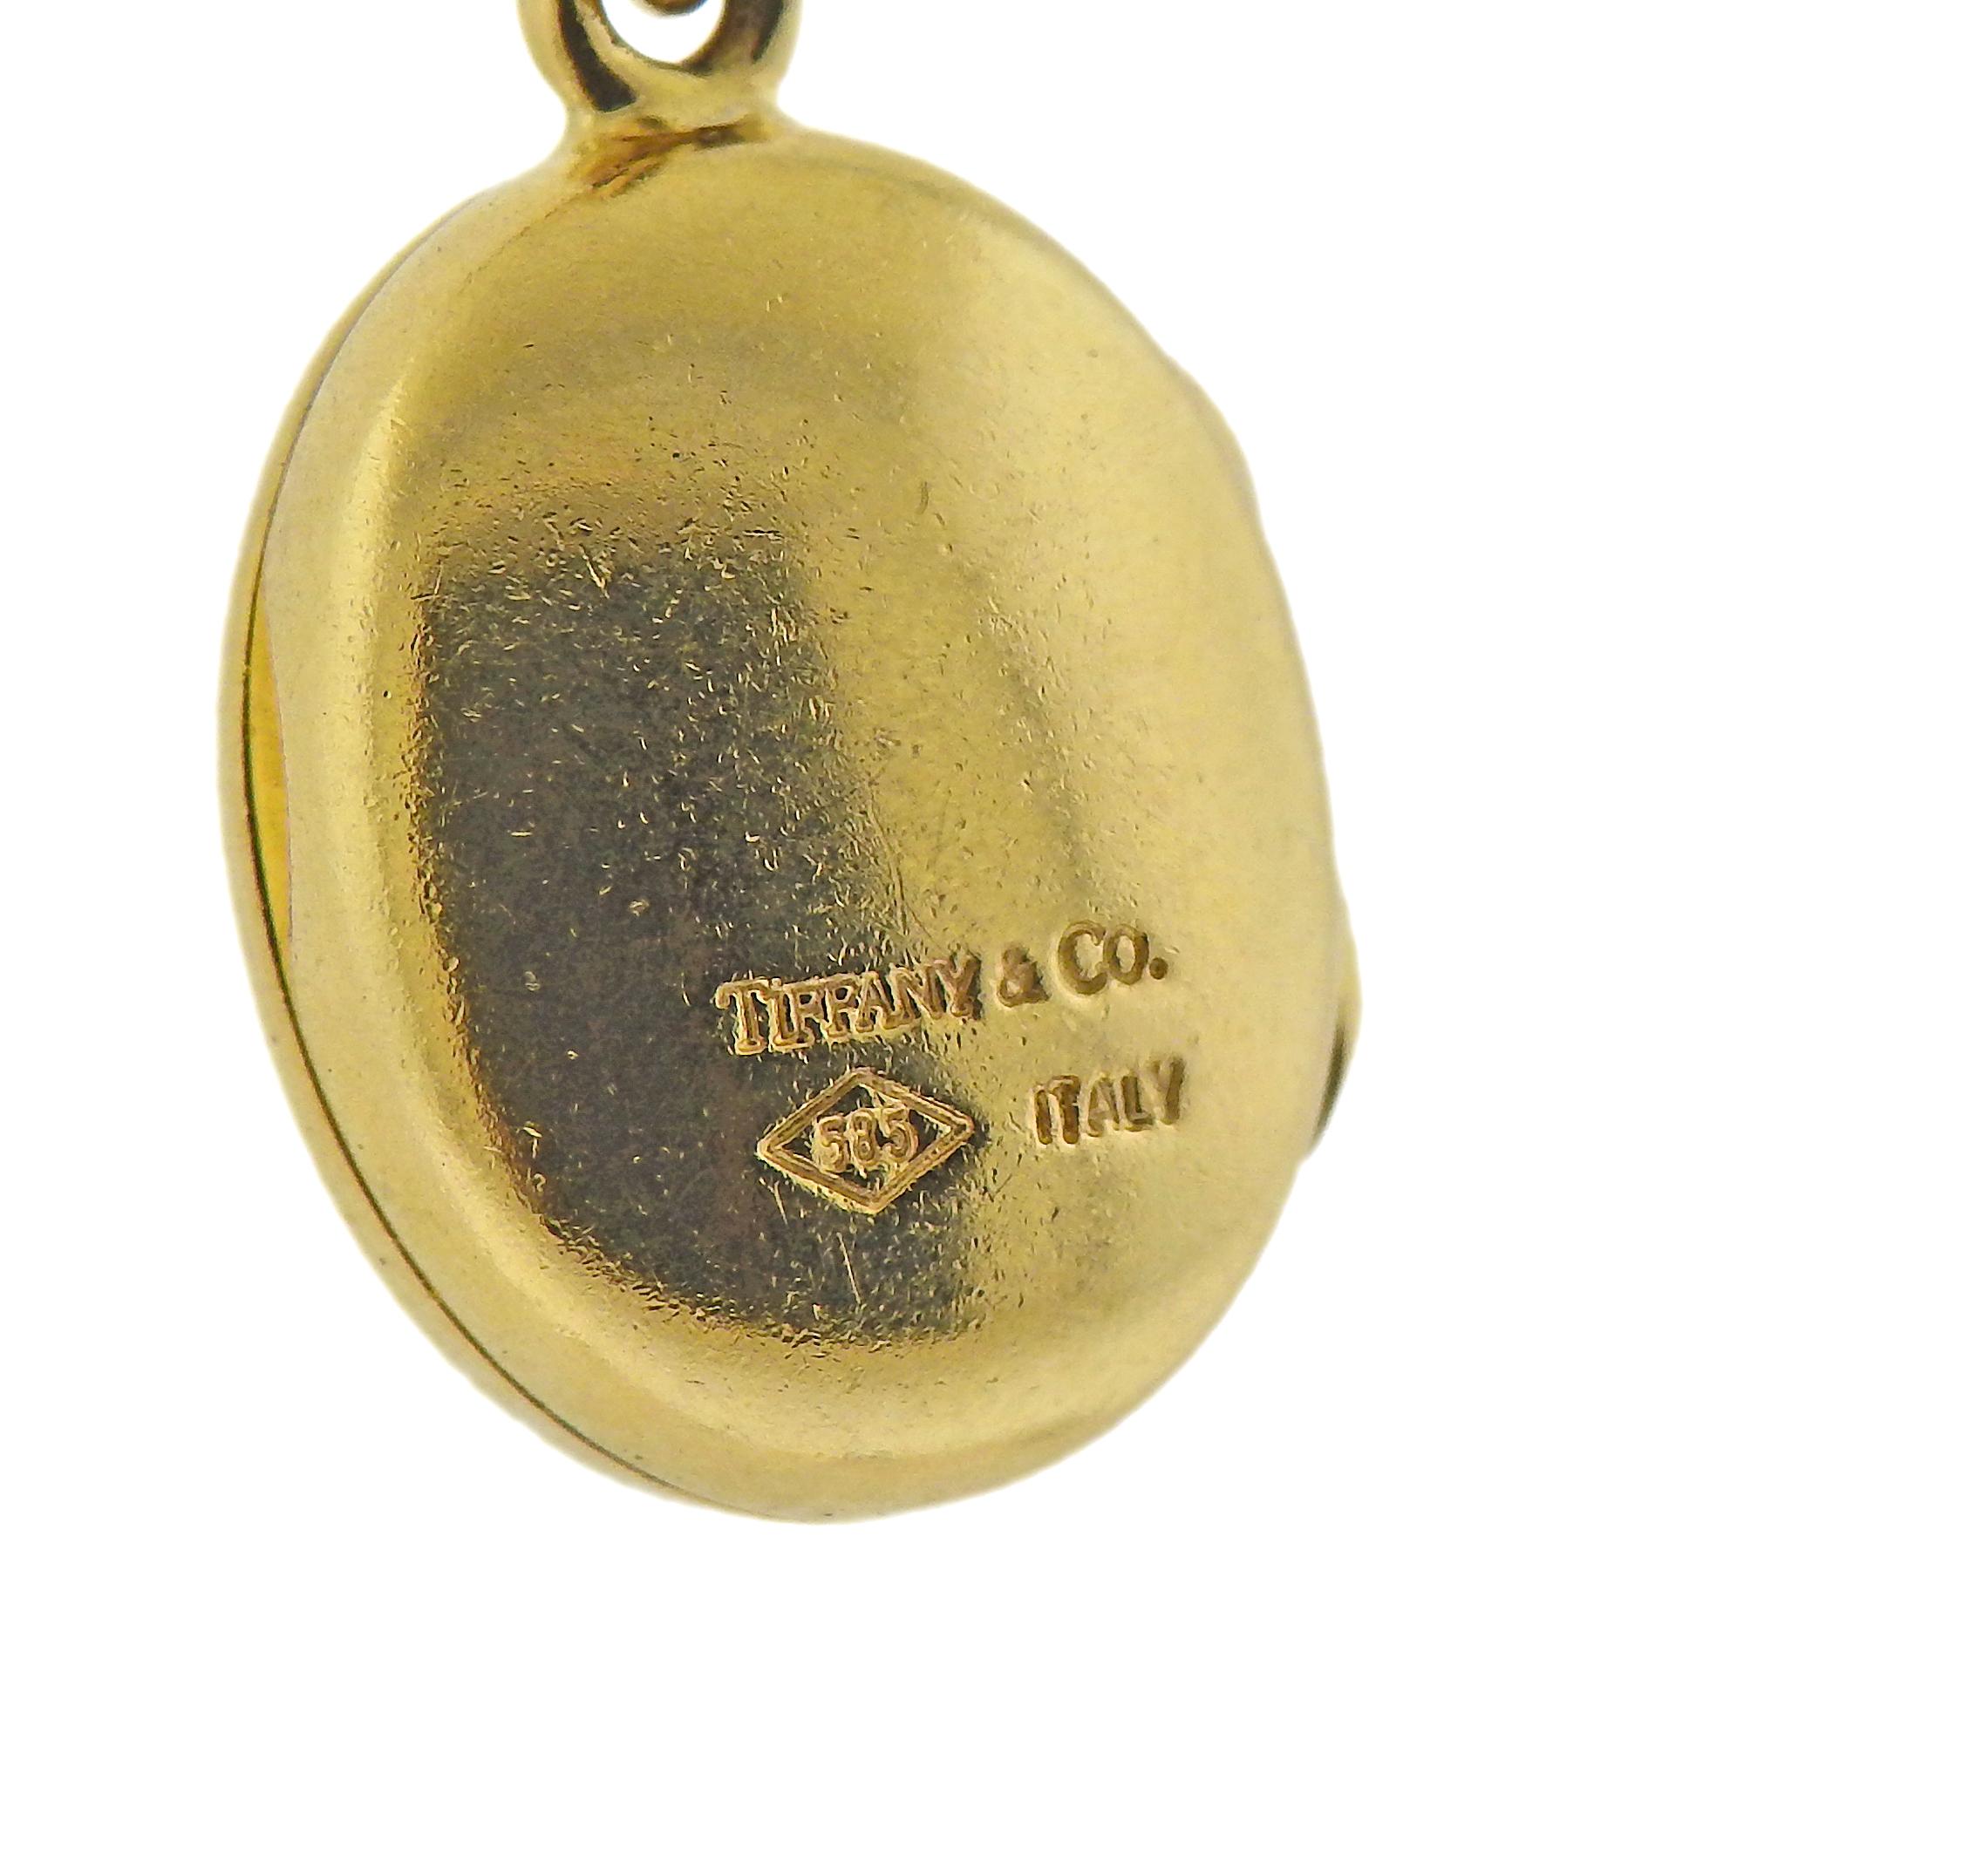 18k gold Tiffany & Co chain necklace with suspended oval 14k gold locket pendant. Necklace is 16